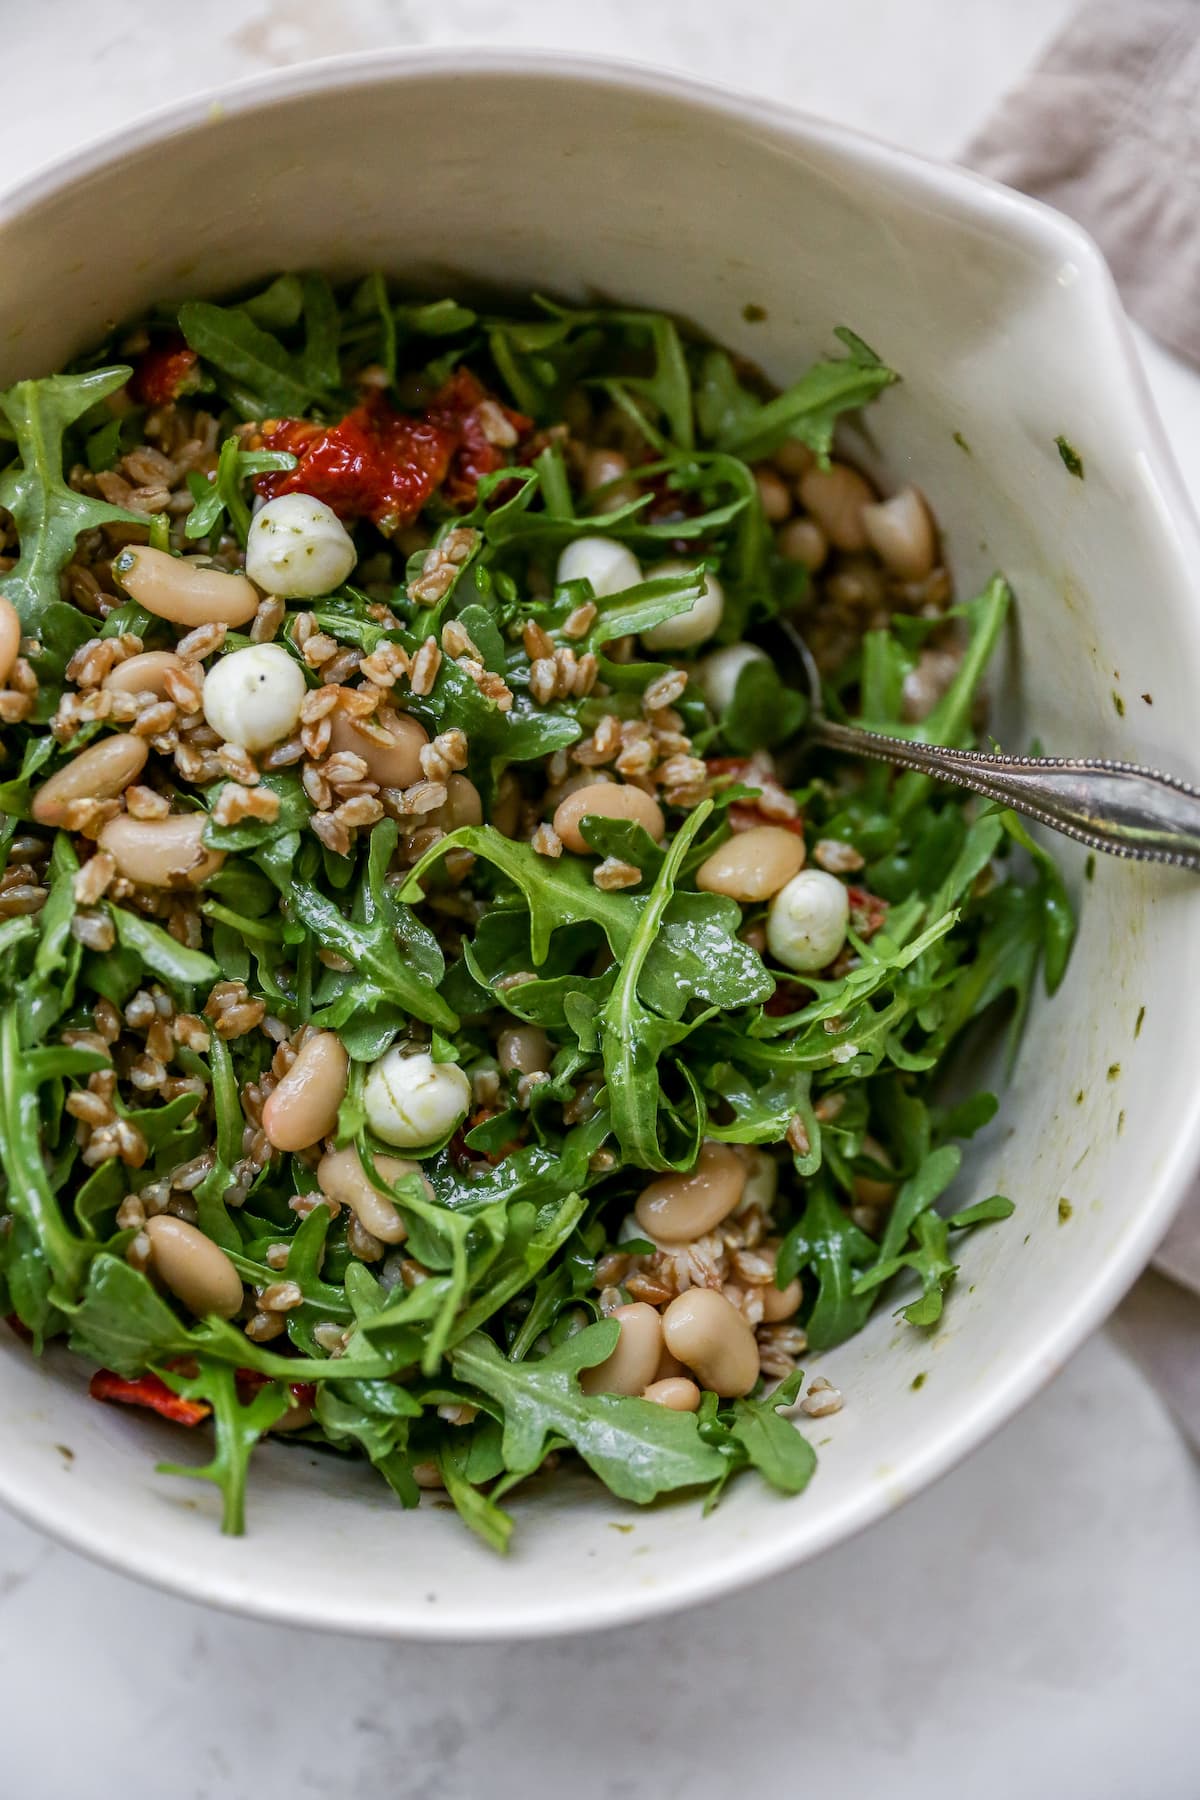 Farro salad with arugula, beans, tomatoes and mozzarella in a mixing bowl with a spoon.